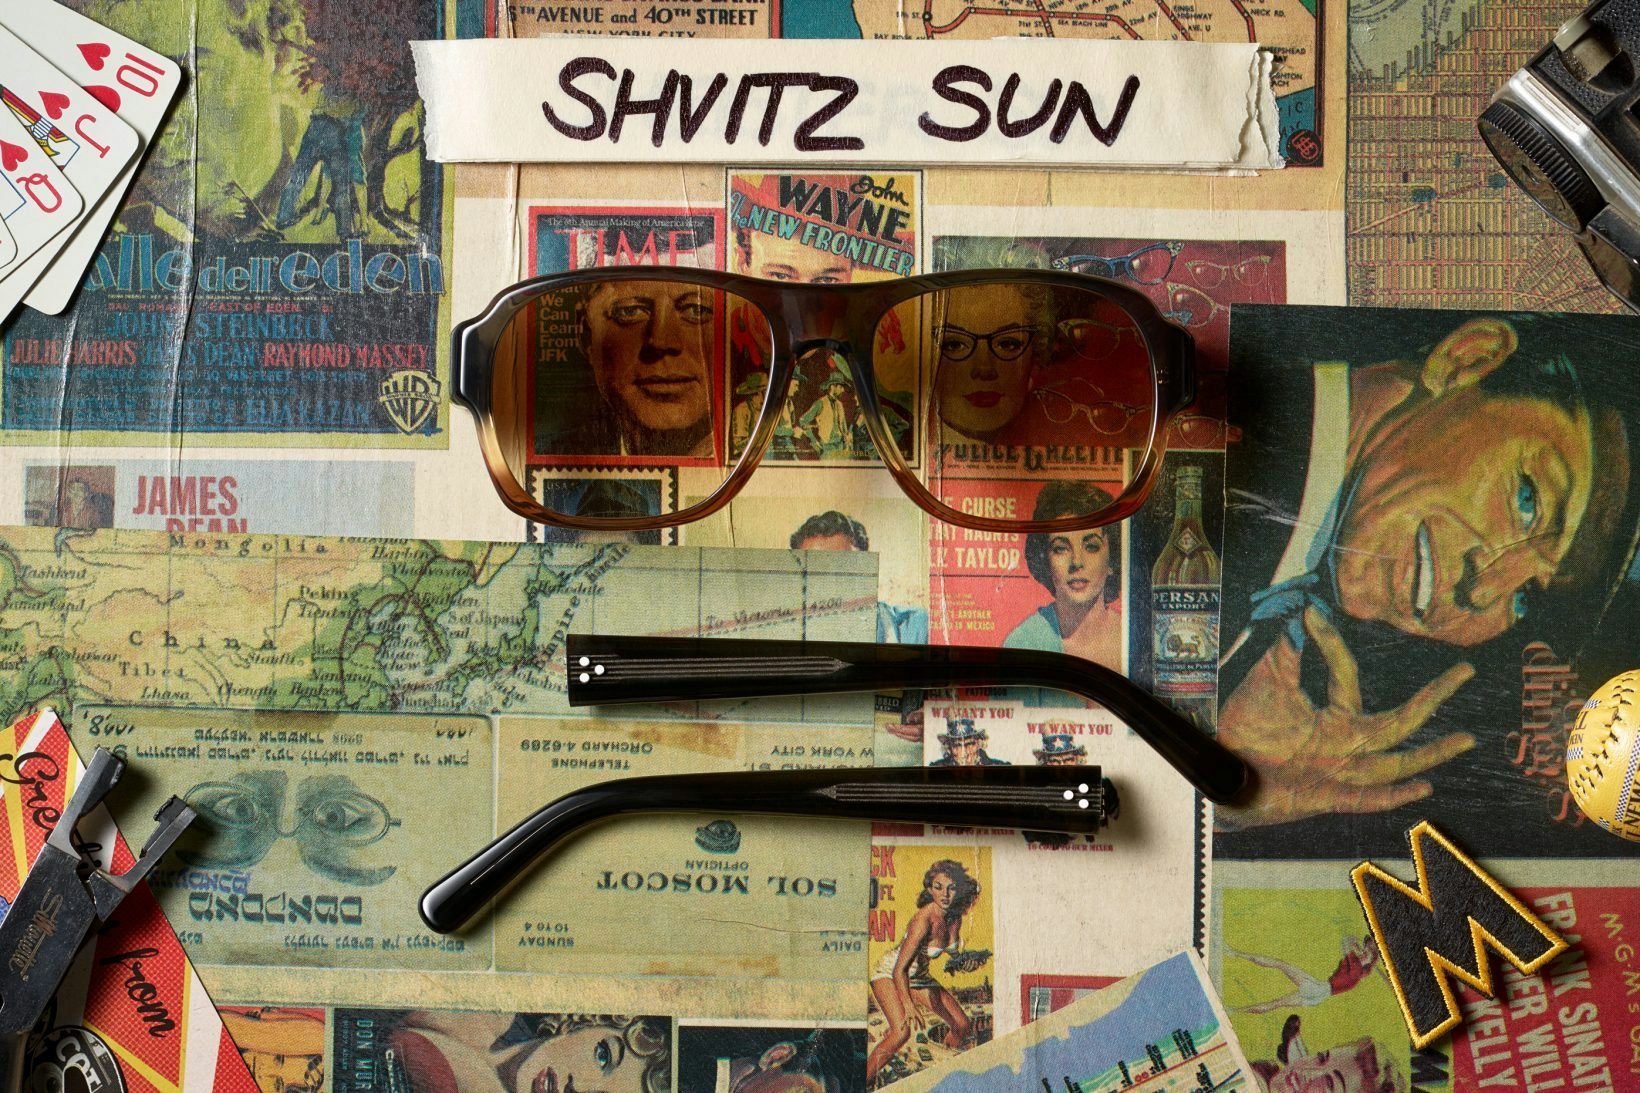 Moscot: The Vintage Eyewear Brand Capturing a Slice of the American Dream